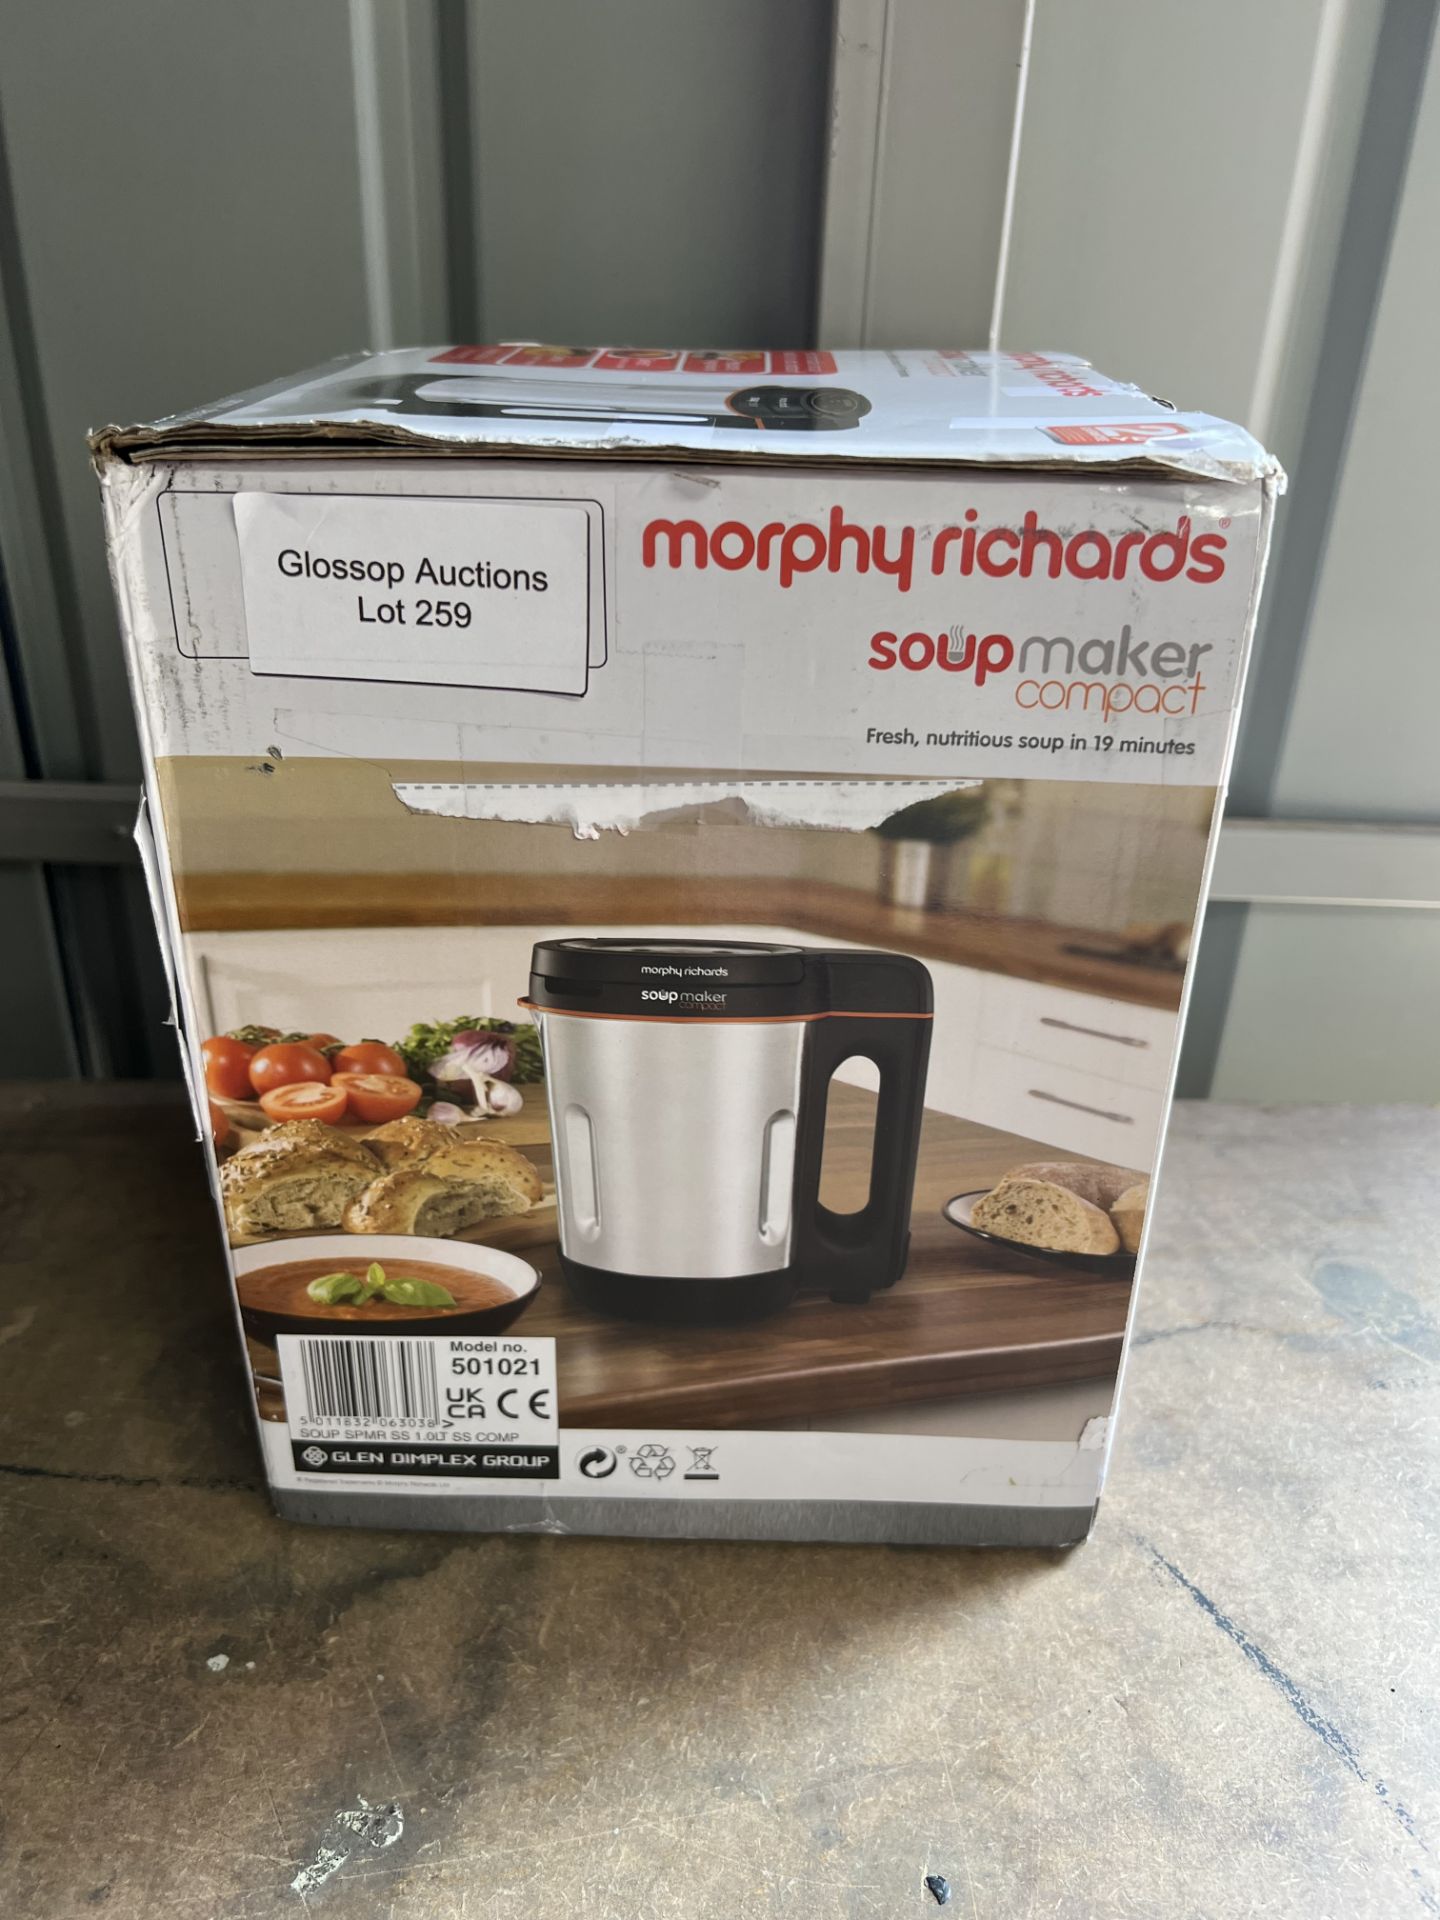 Morphy Richards Compact Soup Maker Stainless Steel 1 Litre. RRP £59.99 - GRADE U - Image 2 of 2